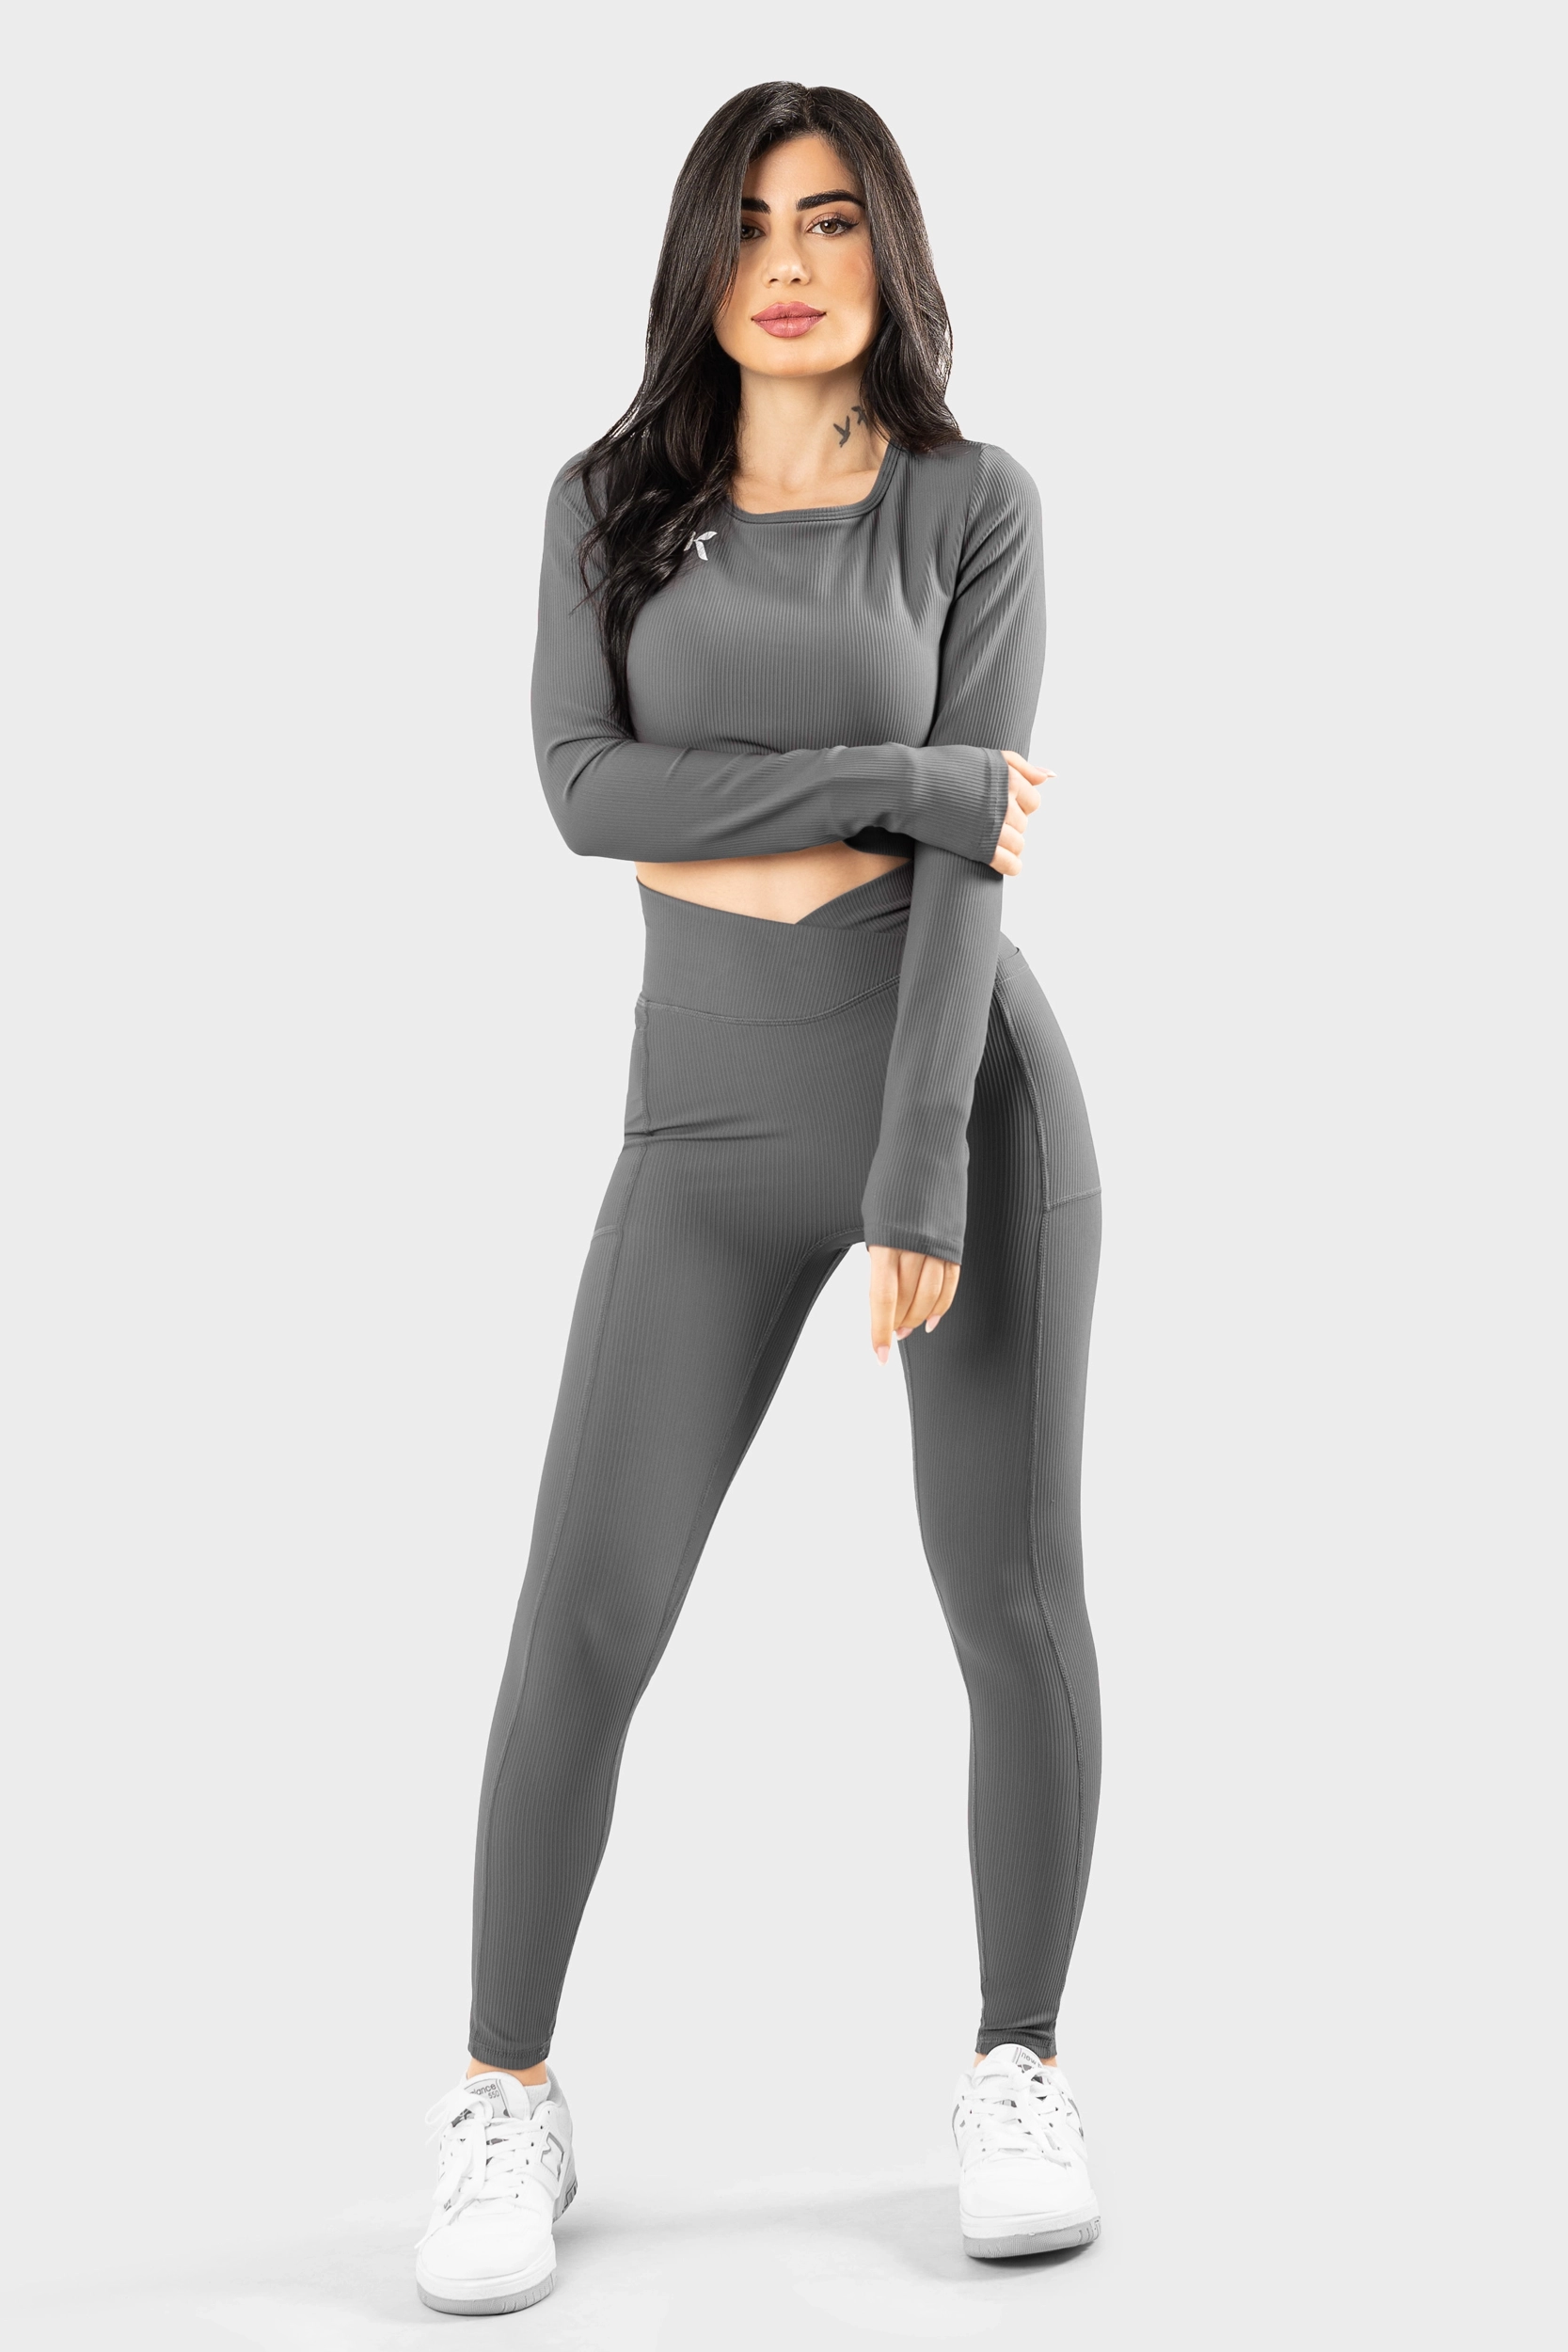 Charcoal Chic Cut-Out Activewear Set - Katrexa Store